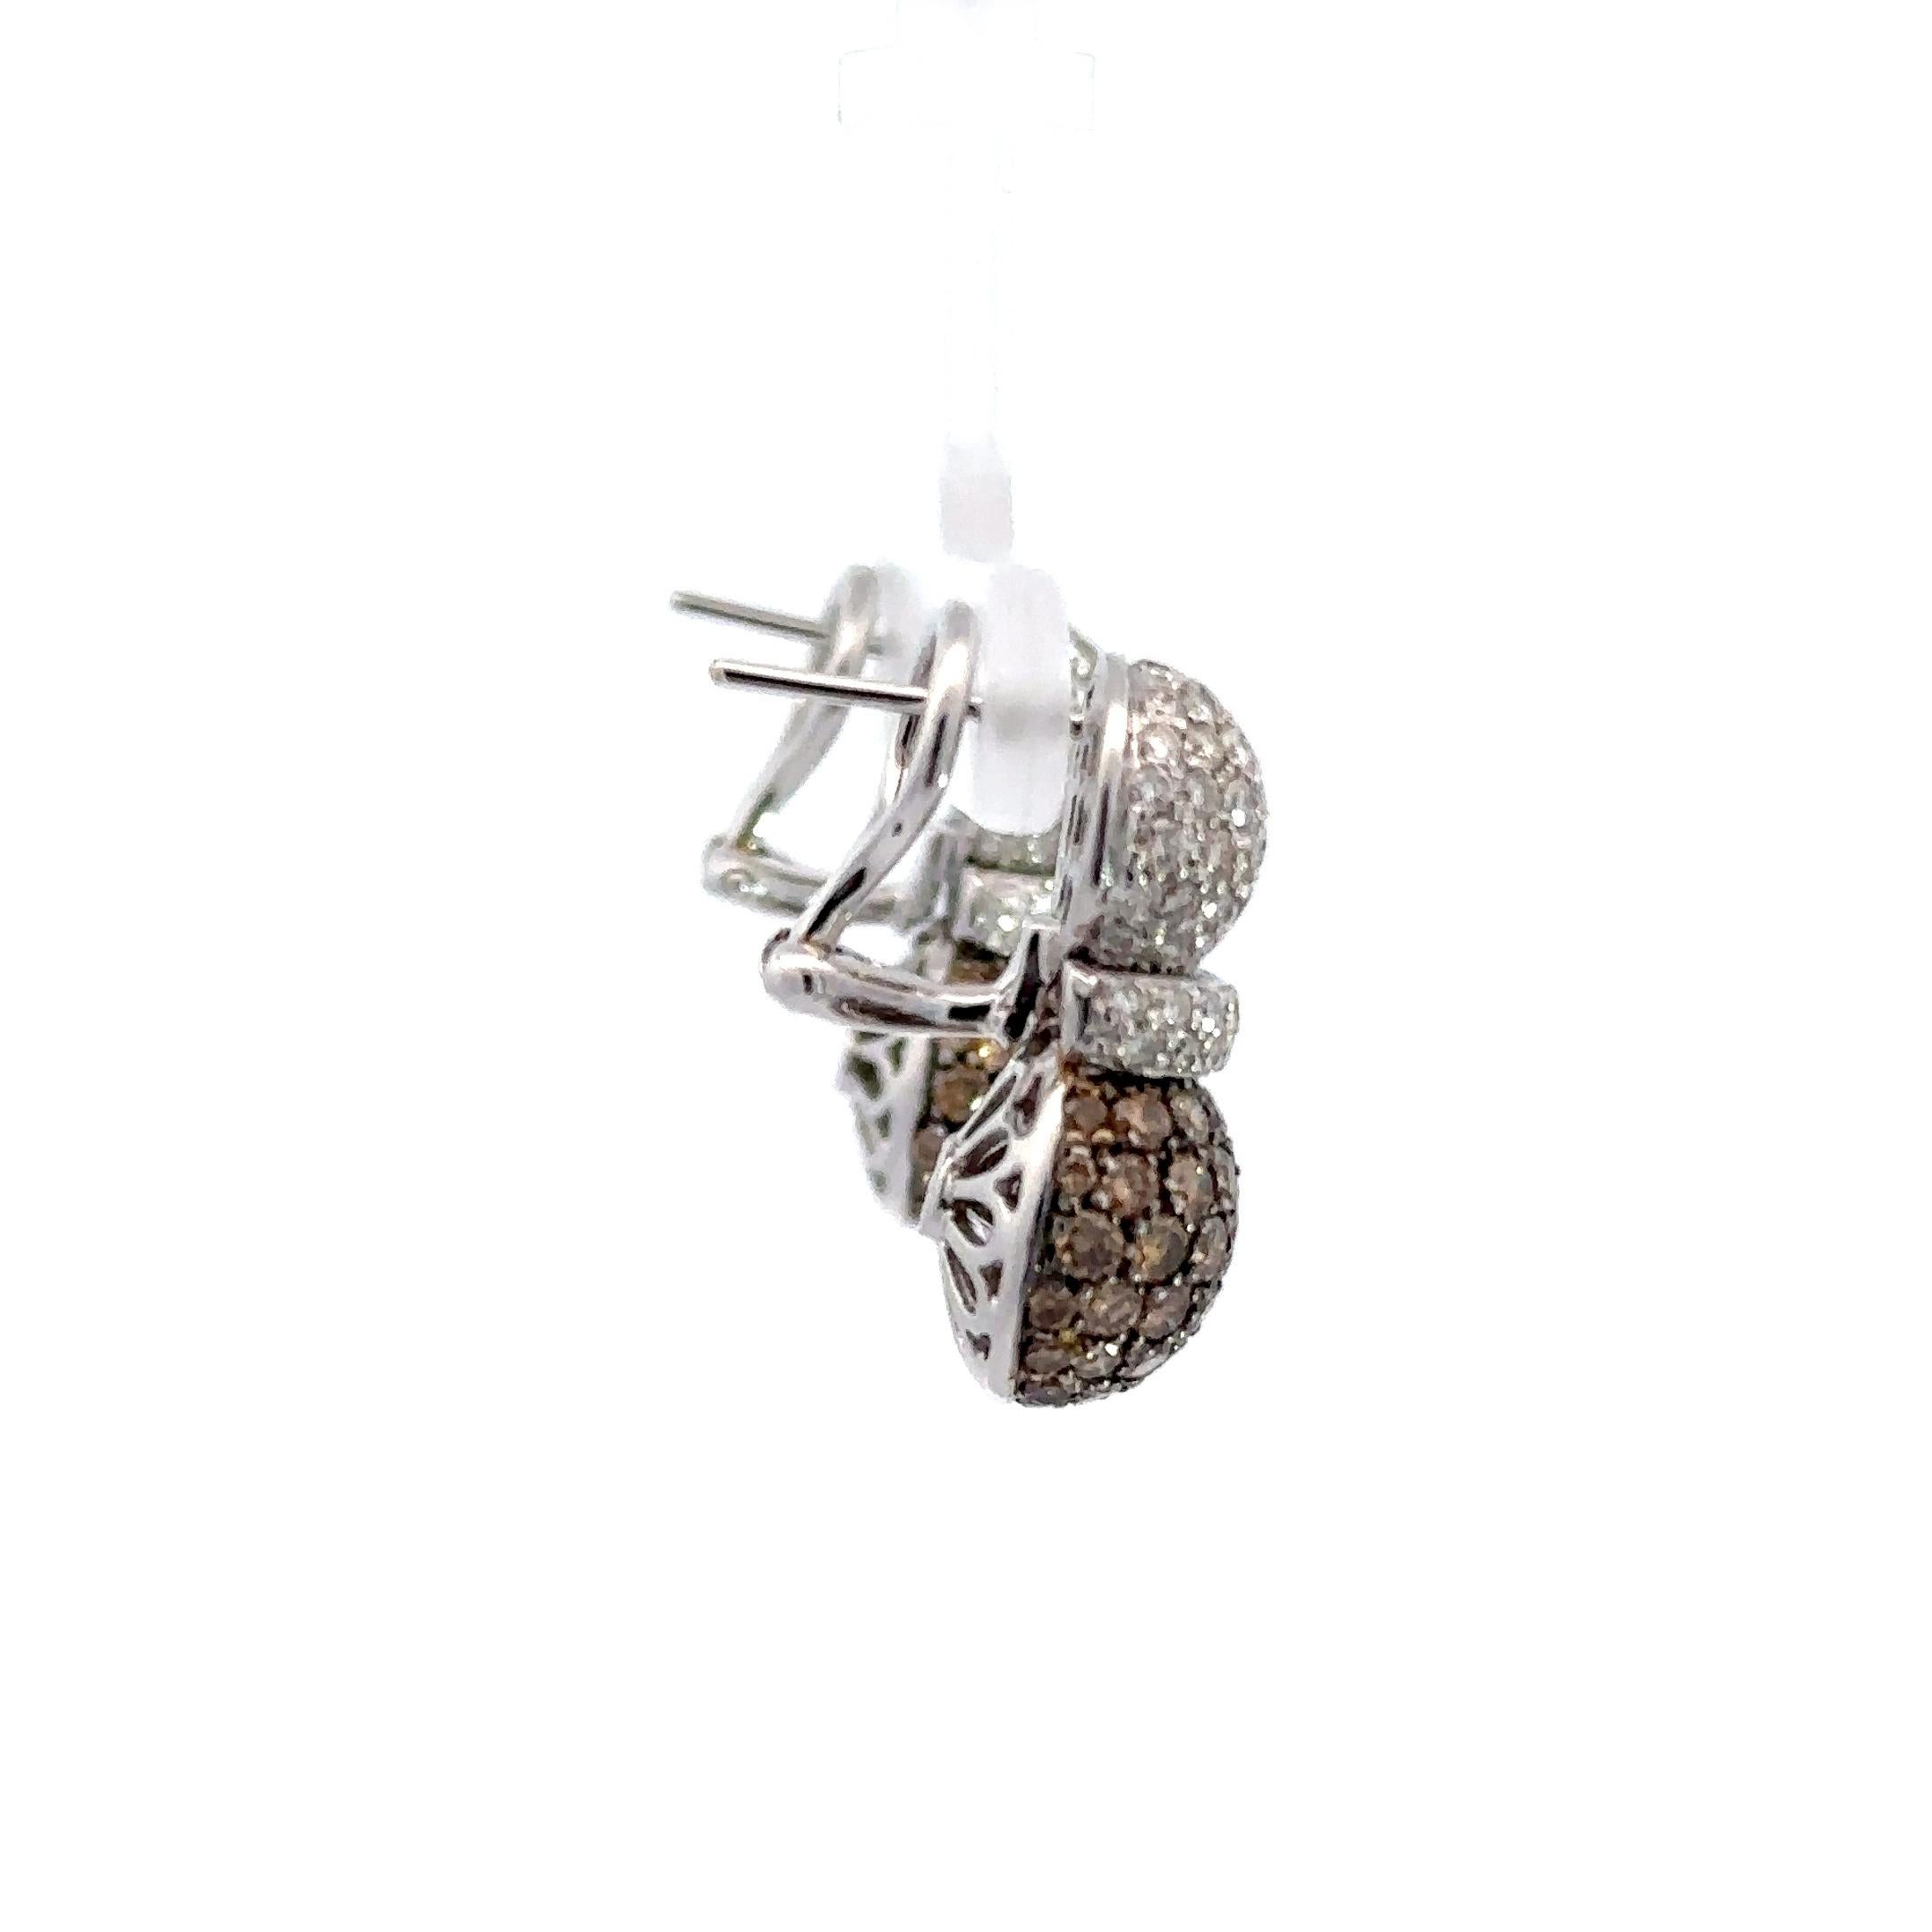 4.36ct of Natural Brown & White Diamond, Pineapple Earrings in 18kt White Gold  For Sale 2